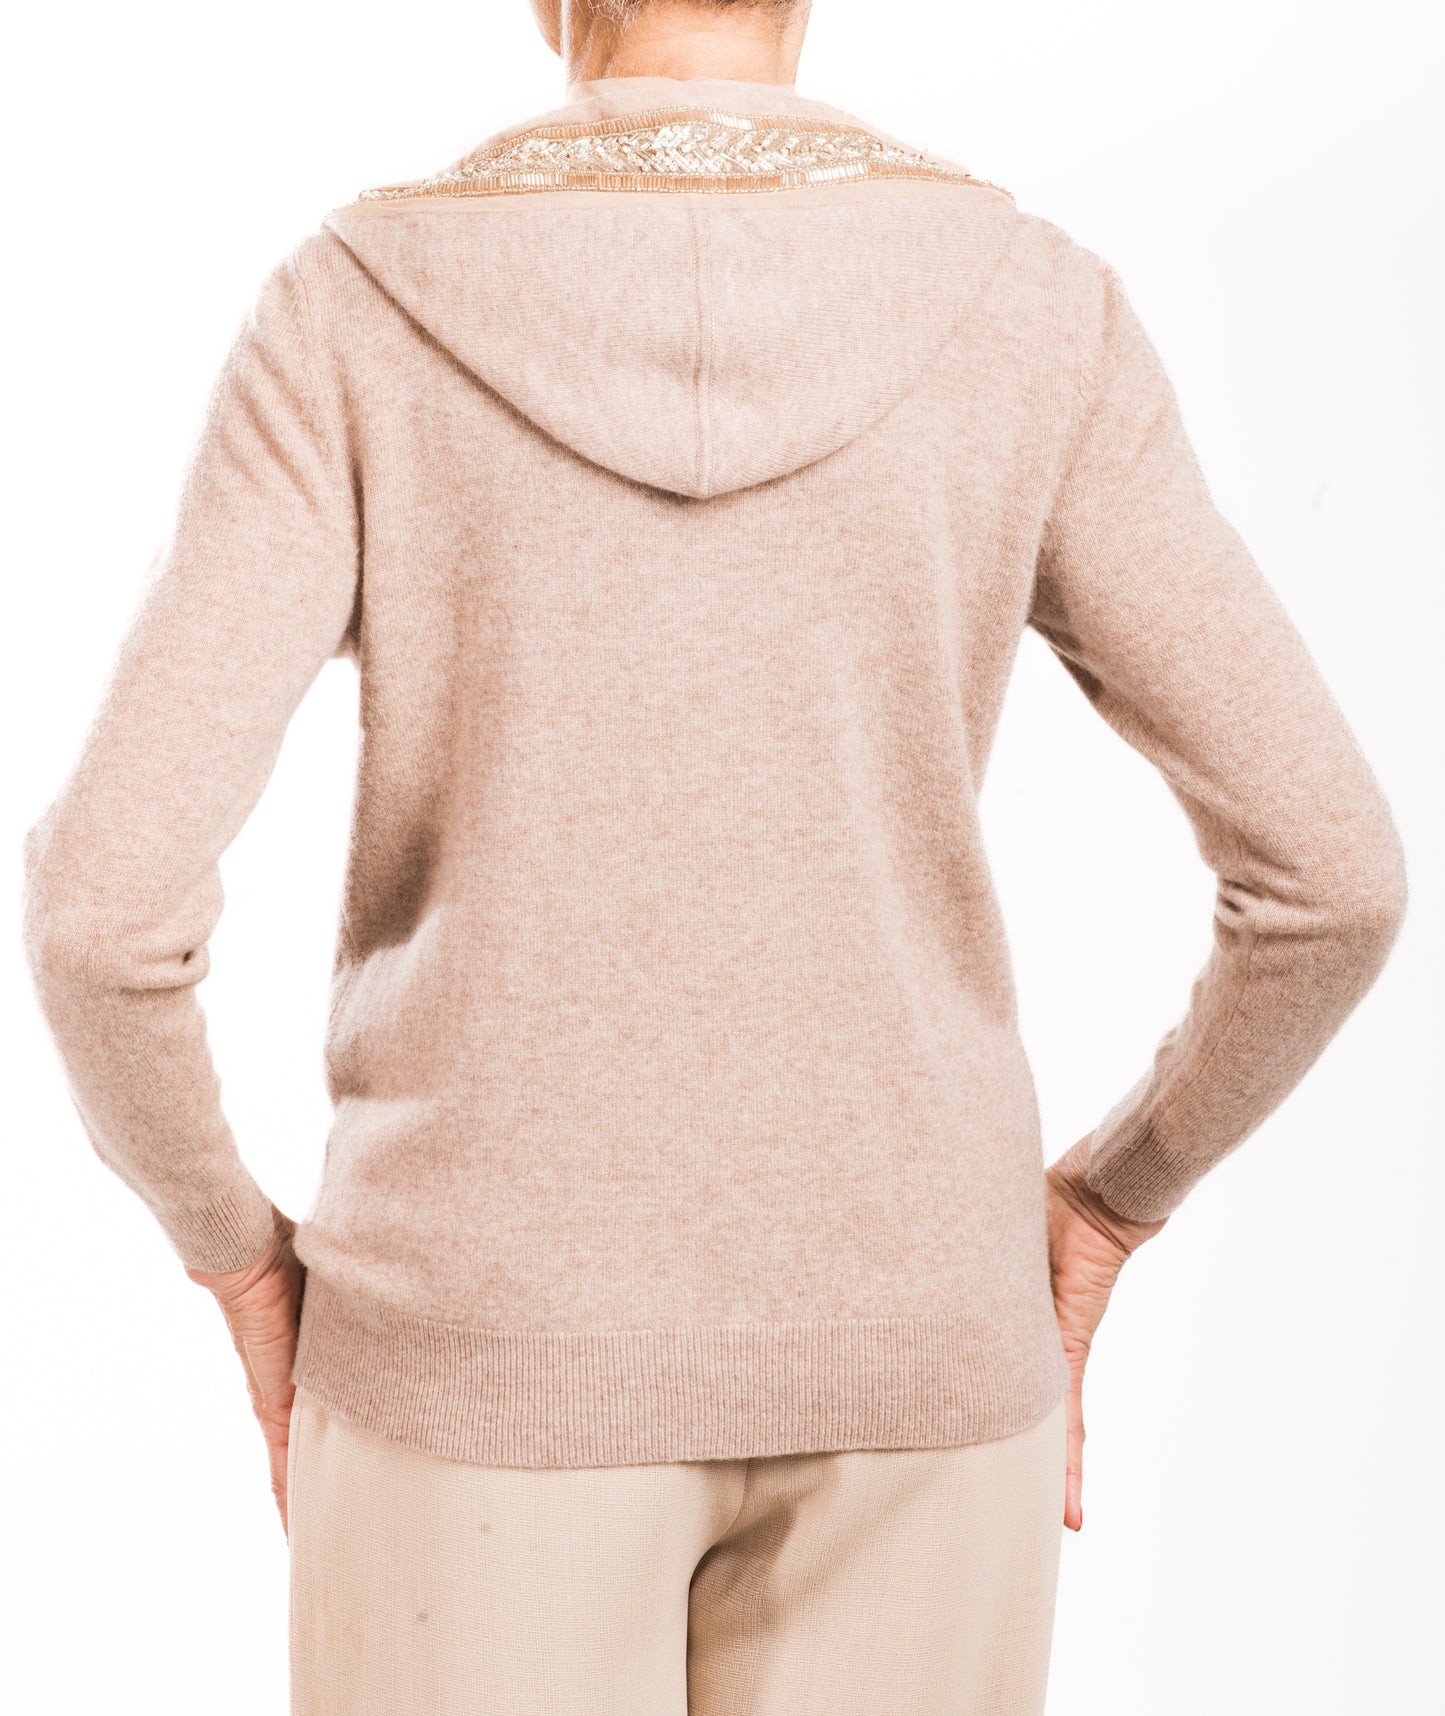 SMALL SAND COLORED LONG SLEEVE CASHMERE HOODIE EMBROIDERED WITH BYZANTINE ANTIQUE BEADED TRIM